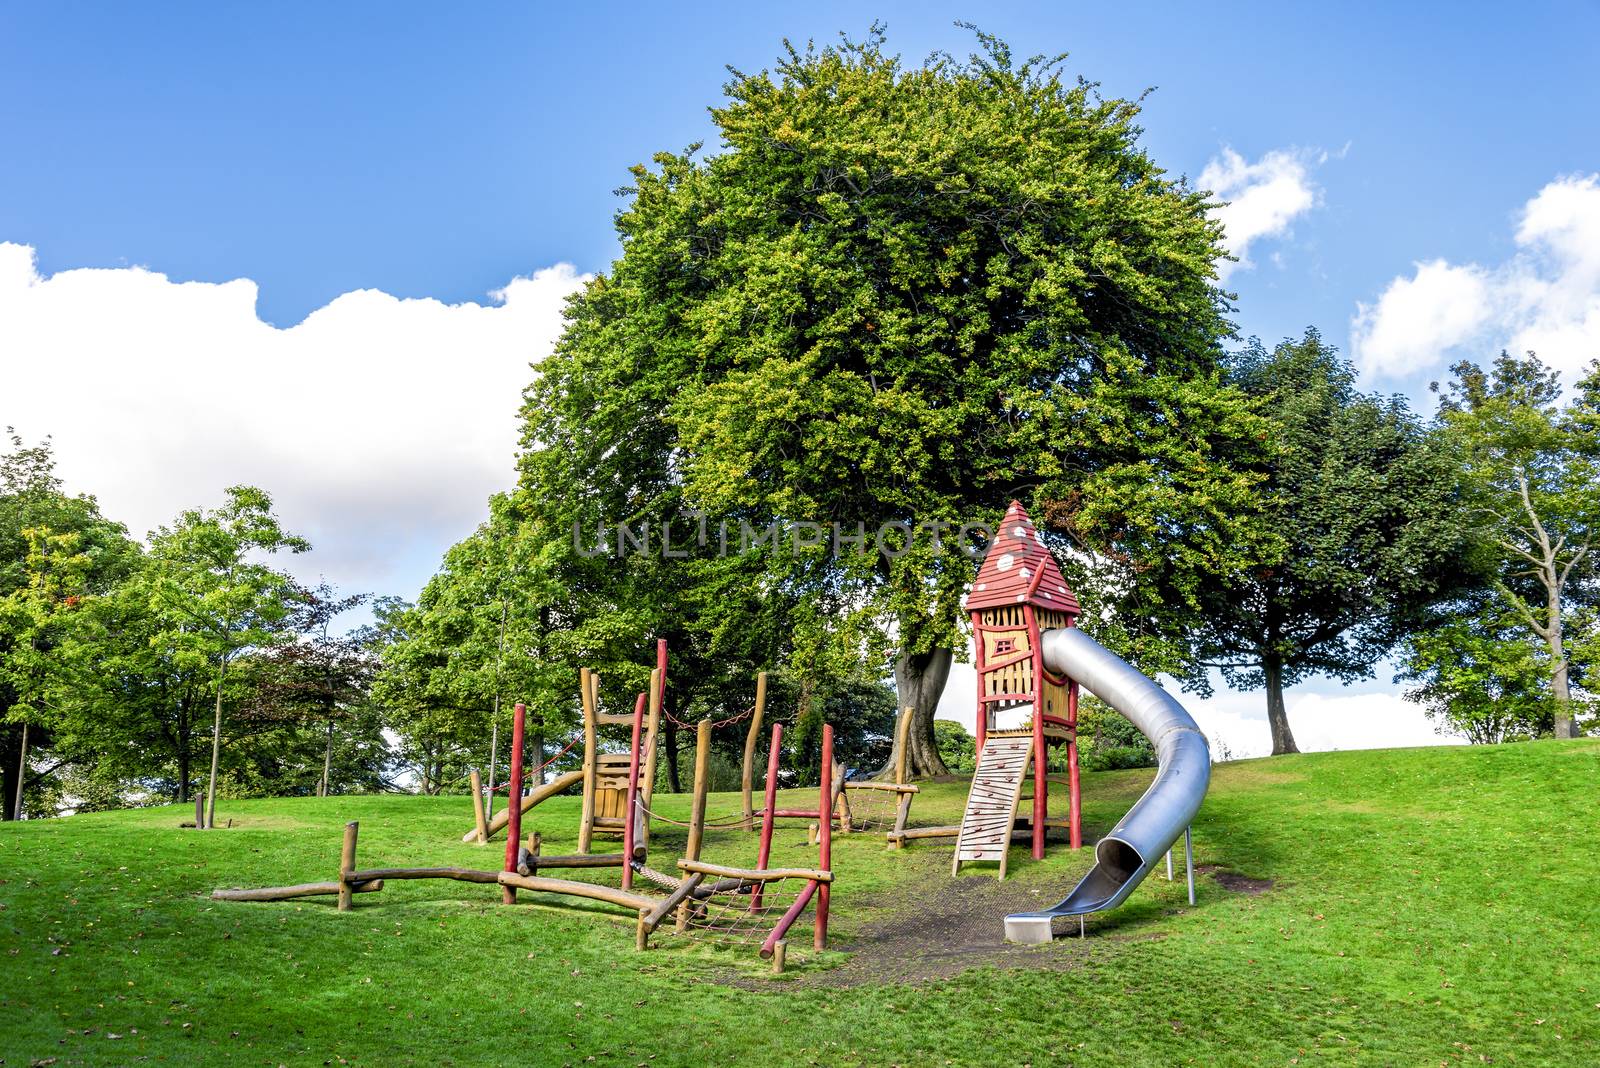 A small obstacle course and a tall magic house with a tube slide in Duthie Park, Aberdeen, Scotland